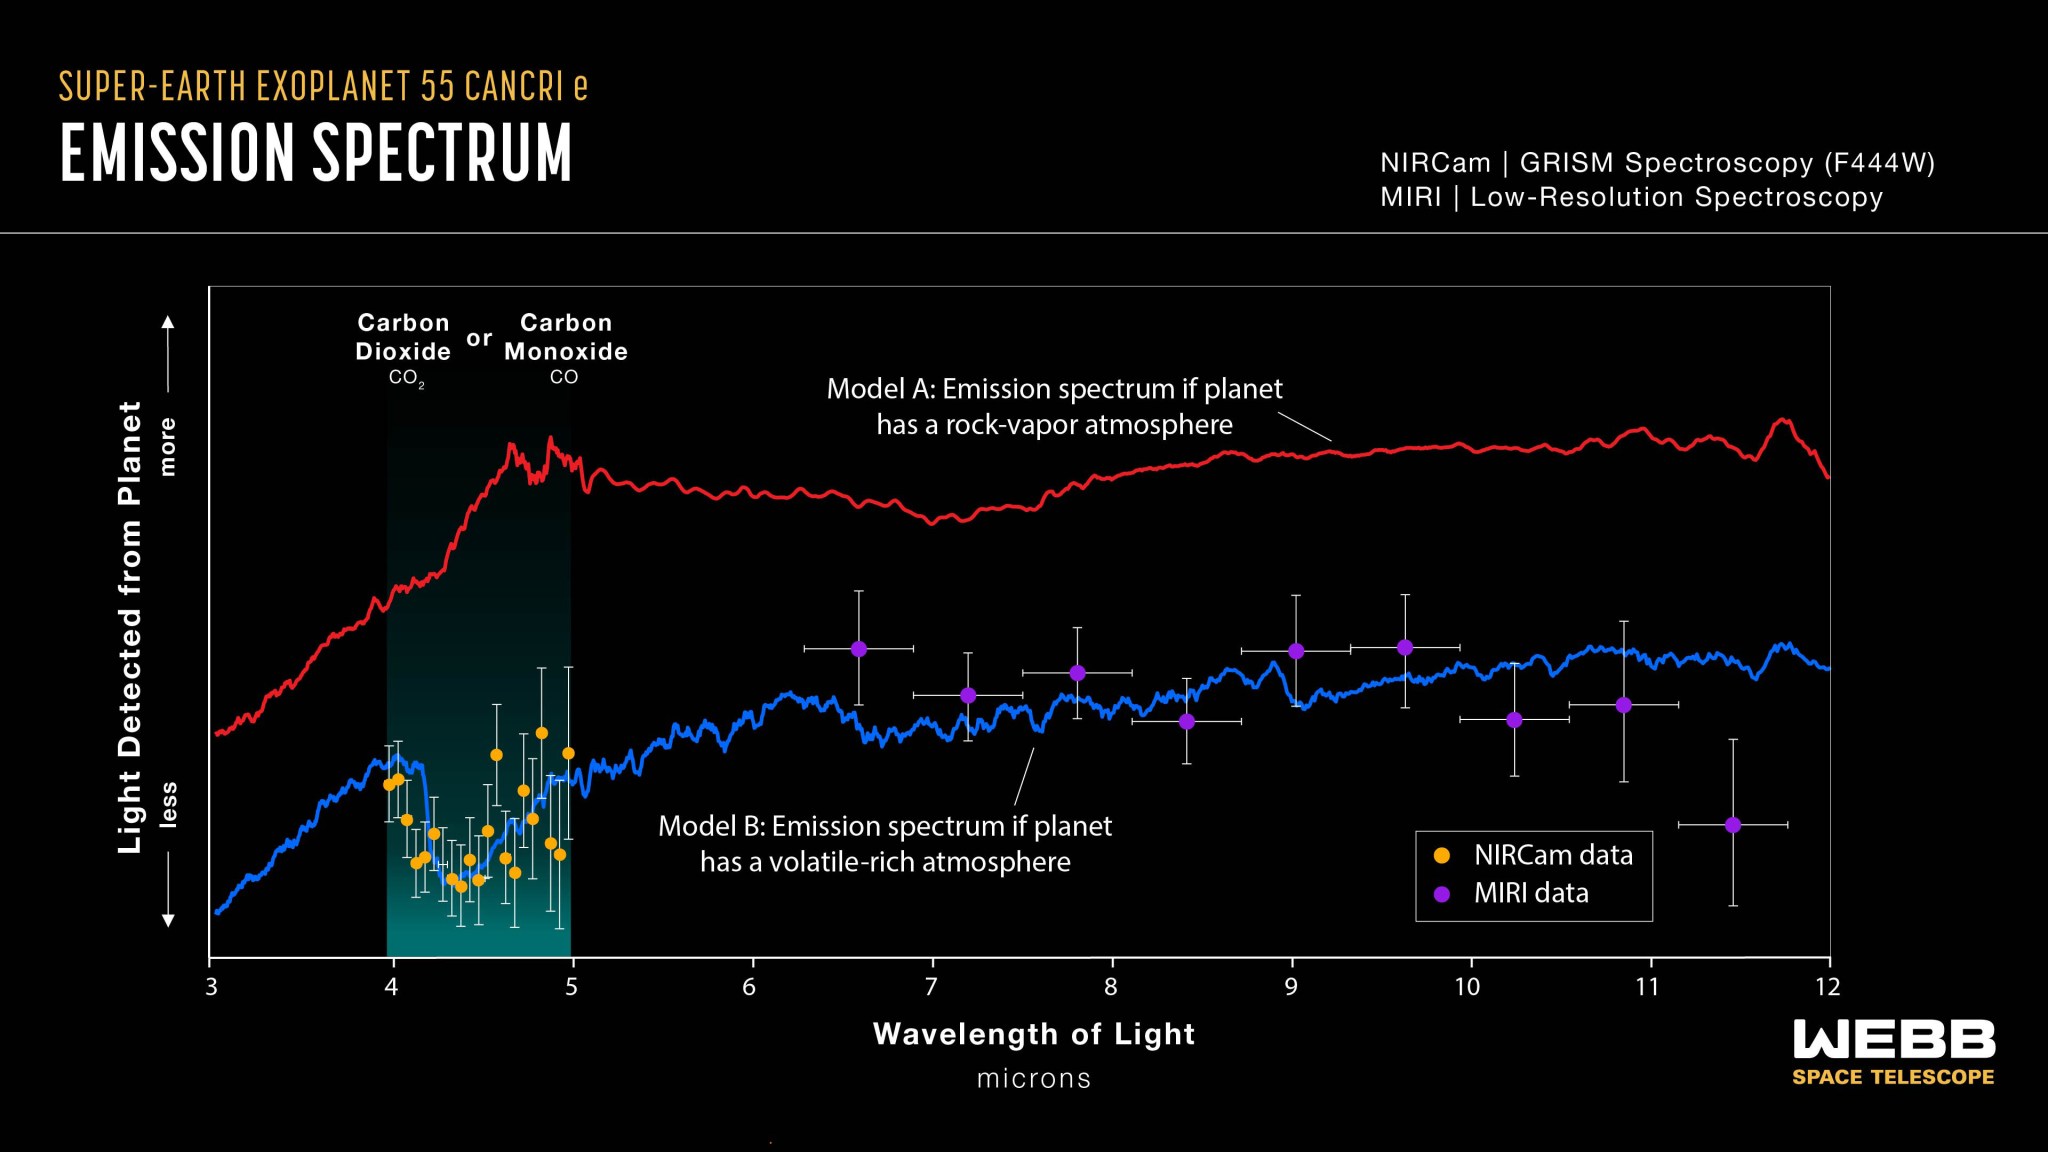 Graphic titled “Super-Earth Exoplanet 55 Cancri e Emission Spectrum, NIRCam Grism Spectroscopy (F444W), MIRI Low-Resolution Spectroscopy” shows a graph of amount of light detected from planet versus wavelength of light, with 2 model emission spectra for comparison. NIRCam data in orange range from 4 to 5 microns. MIRI data in purple range from 6.5 to 11.5 microns. Red line along the upper half of the graph is labeled “Model A: Emission spectrum if planet has a rock-vapor atmosphere.” Blue line along the bottom half of the graph is labeled “Model B: Emission spectrum if planet has a volatile-rich atmosphere.” Pattern of data points align closely to pattern of blue, volatile-rich model. Region between 4 and 5 microns, which includes NIRCam data, is highlighted in green and labeled “Carbon Dioxide C O 2 or Carbon Monoxide C O.” Both NIRCam data and blue volatile-rich model show dip in brightness. Red rock-vapor model does not show this dip.